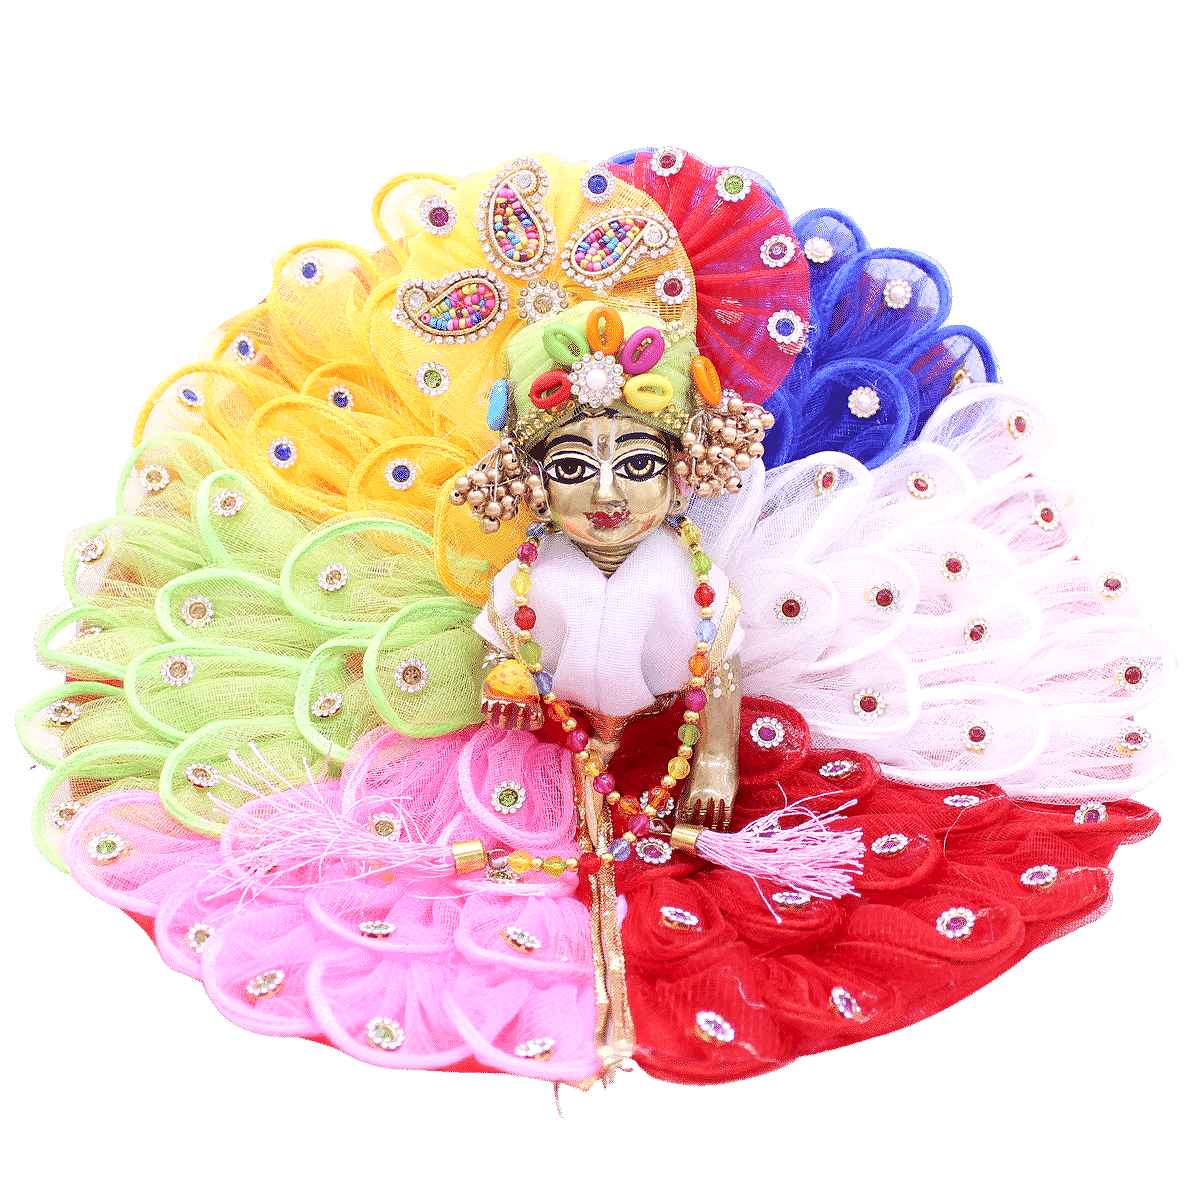 Beautiful Dress in Multi Color (Rainbow) with Beautiful Turban Laddu Gopal  Dress/Laddu Gopal Designer Dress/Lord Krishna (4) : Amazon.in: Home &  Kitchen